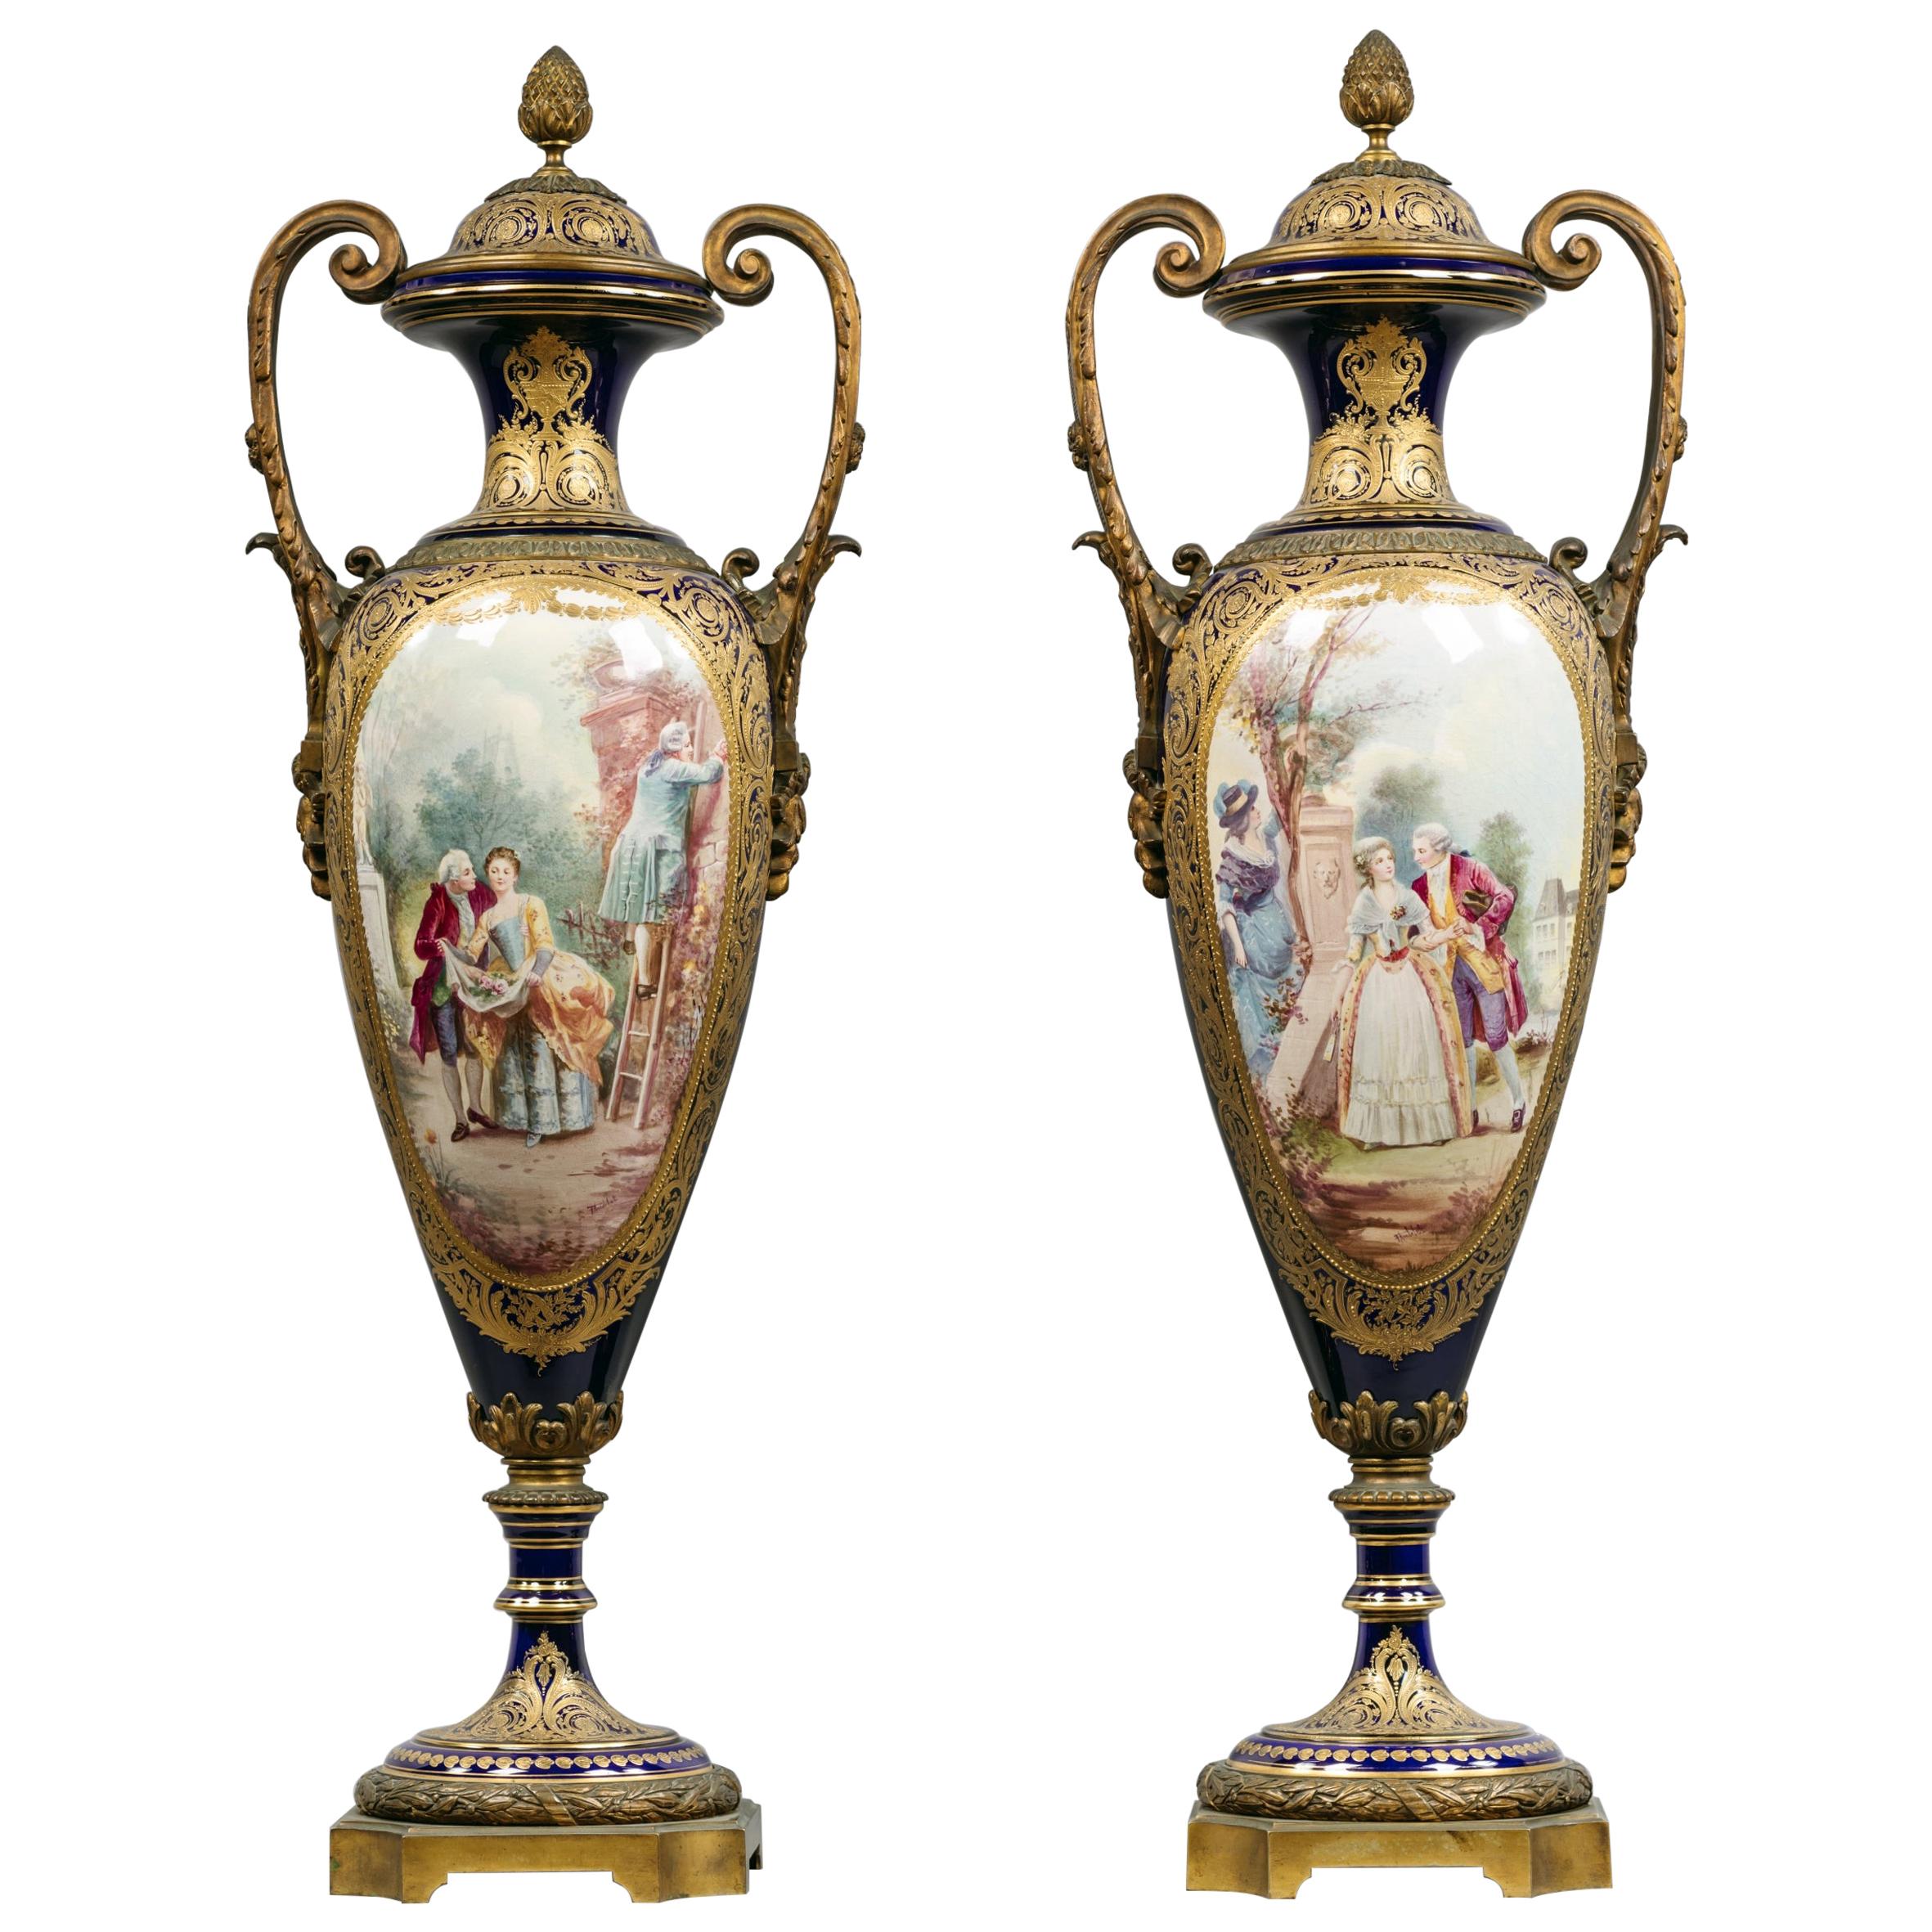 Pair of Gilt-Bronze Sèvres Style Porcelain Vases and Covers For Sale